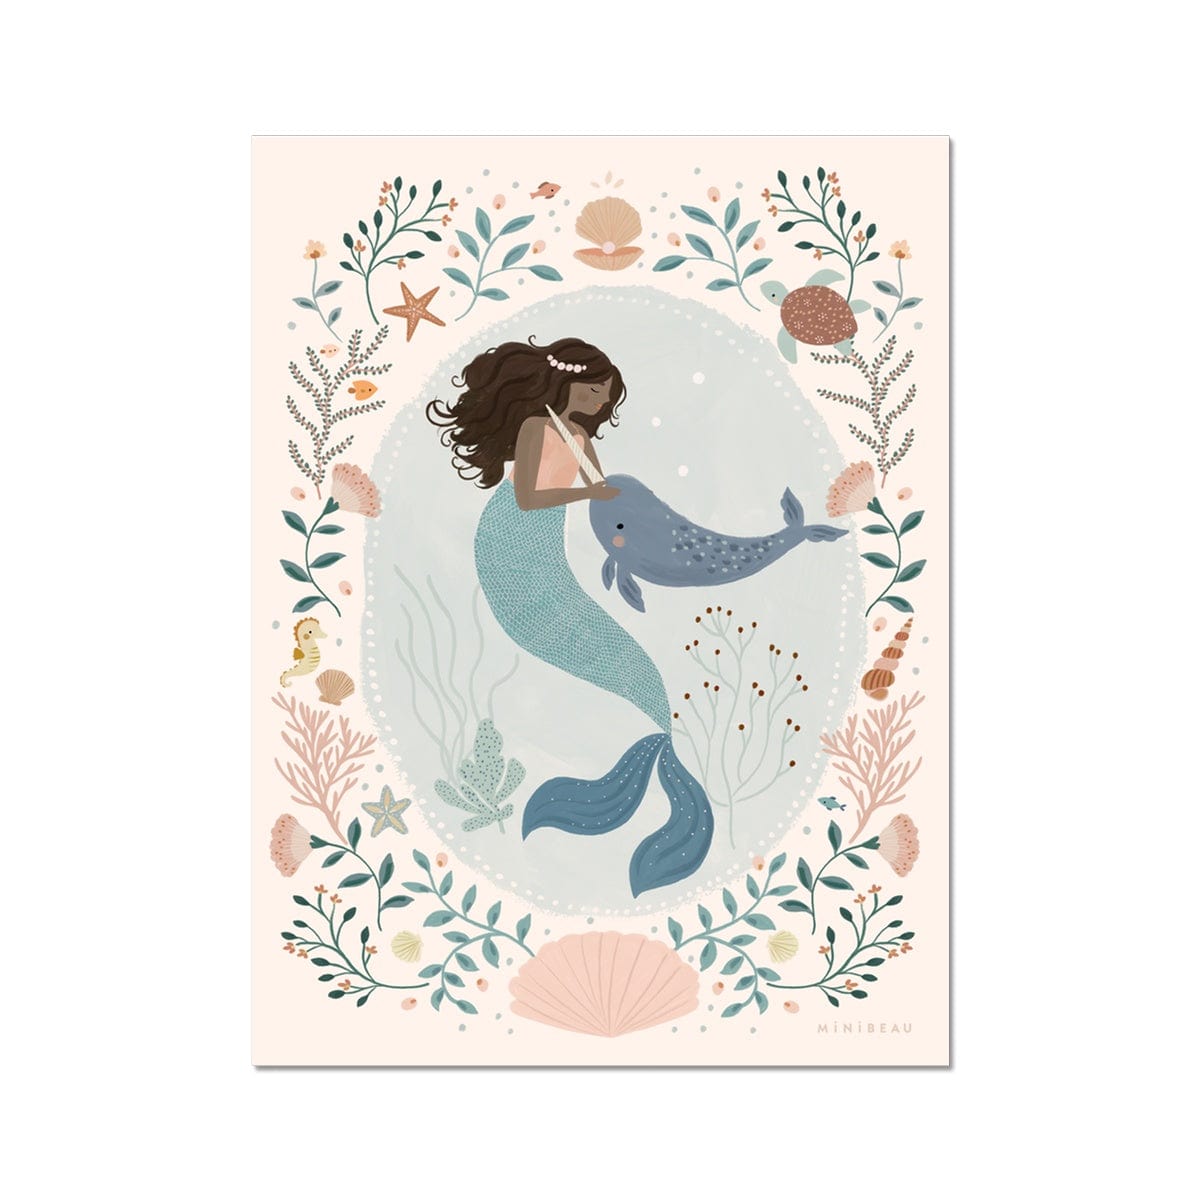 Beautiful dark skinned and haired mermaid with a pearl headband petting her friend Narwhal within a pale teal coloured oval background with white dots round the edge. On the outside of the oval is a sea themed border on a neutral background. The border consists of foliage, flowers and items you would find at the bottom of the sea, shells, turtle, sea horse with a large clam shell at the bottom.